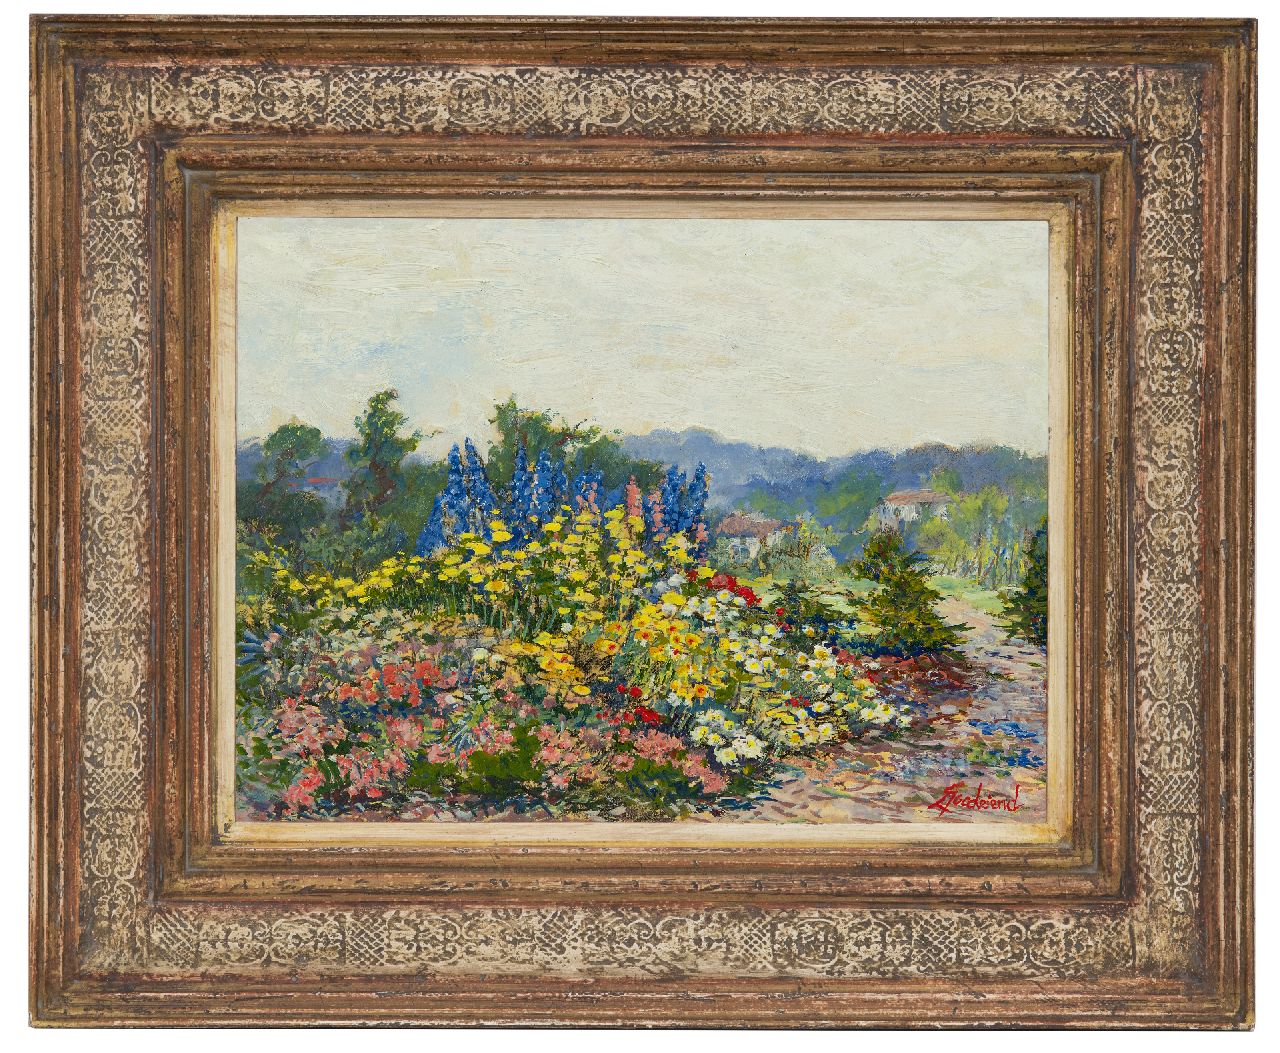 Goedvriend Th.F.  | Theodoor Franciscus 'Theo' Goedvriend, Summer garden in bloom, oil on paper laid down on board 27.7 x 37.4 cm, signed l.r.